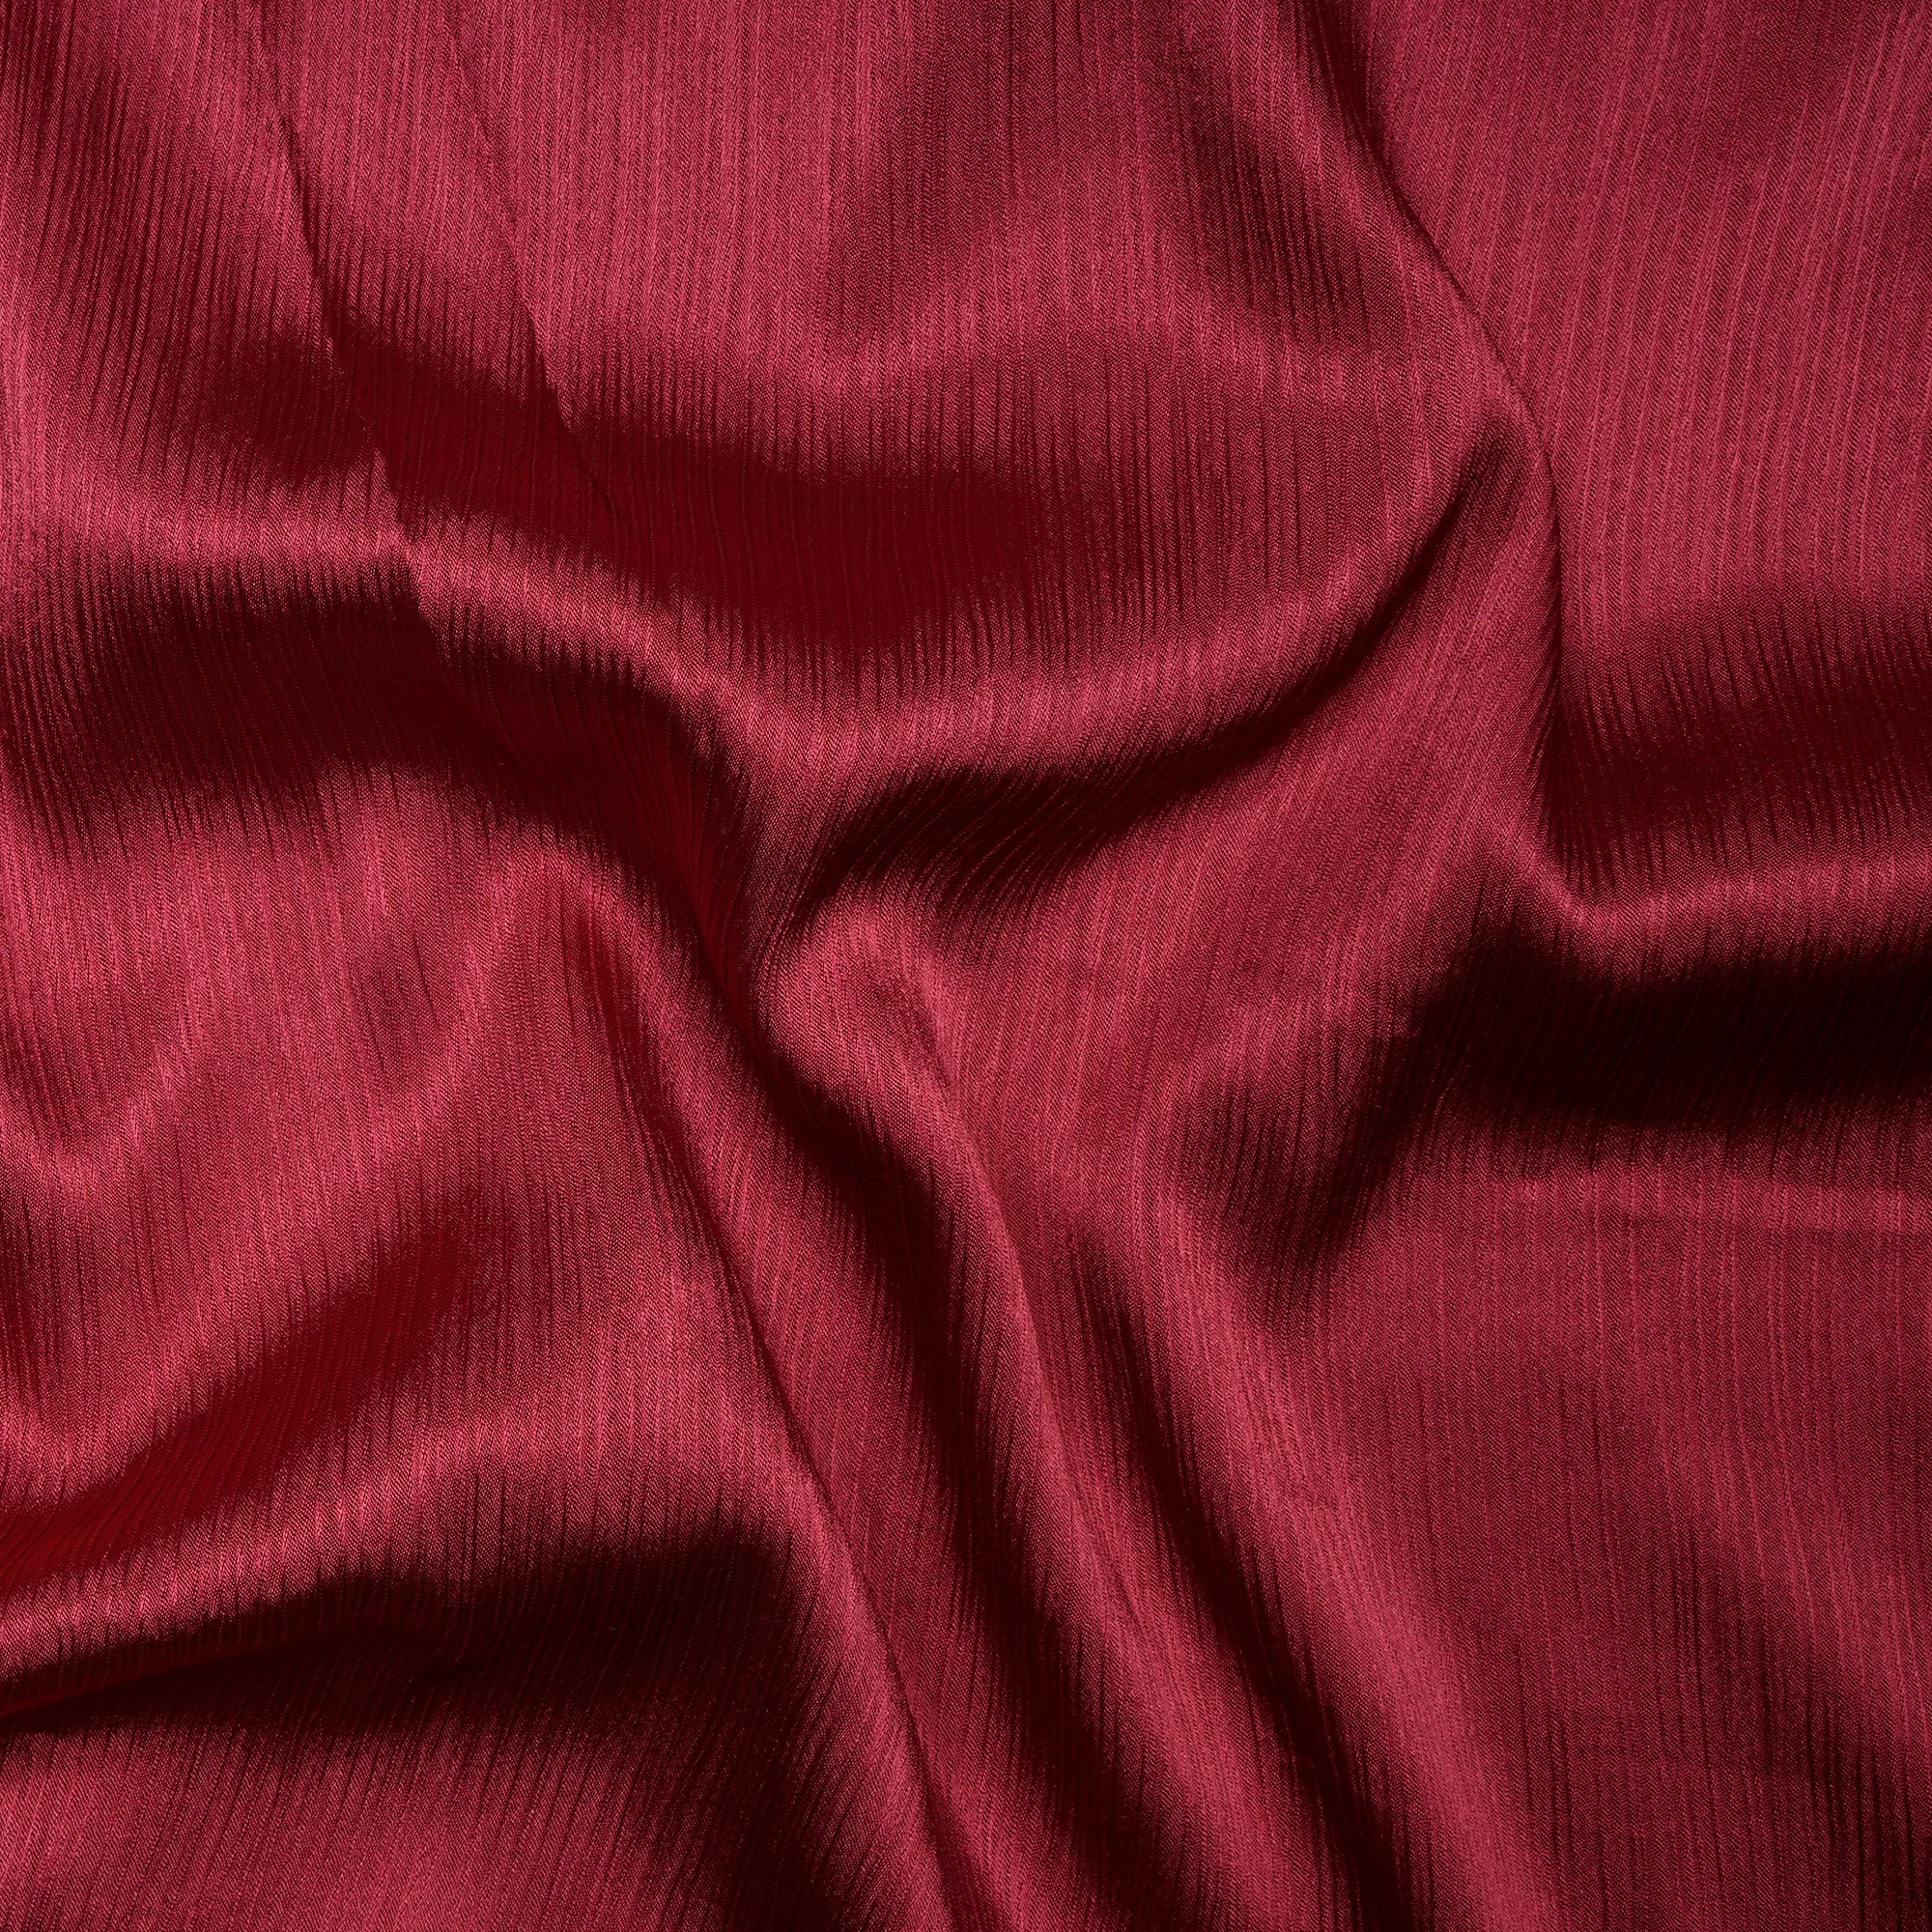 Cerise Imported Crinkled Satin Fabric (60" Wide)